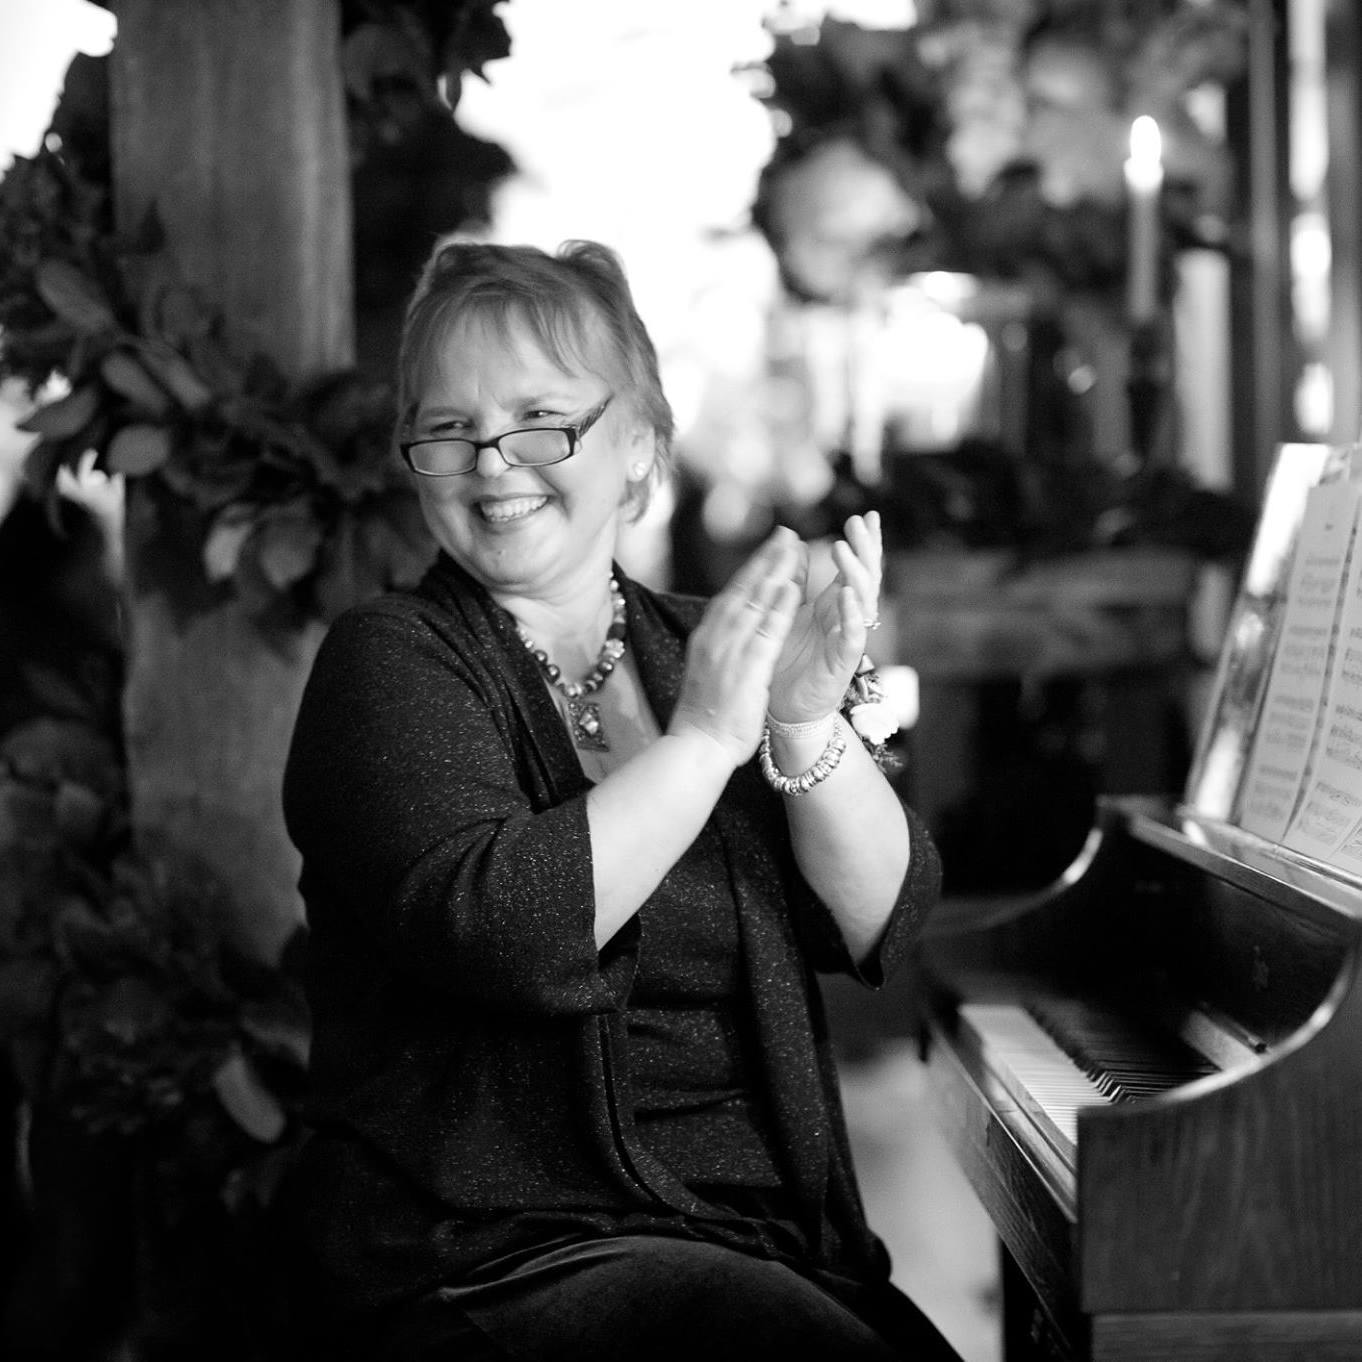 We are happy to introduce our new Music Director, Nena LaMarre!